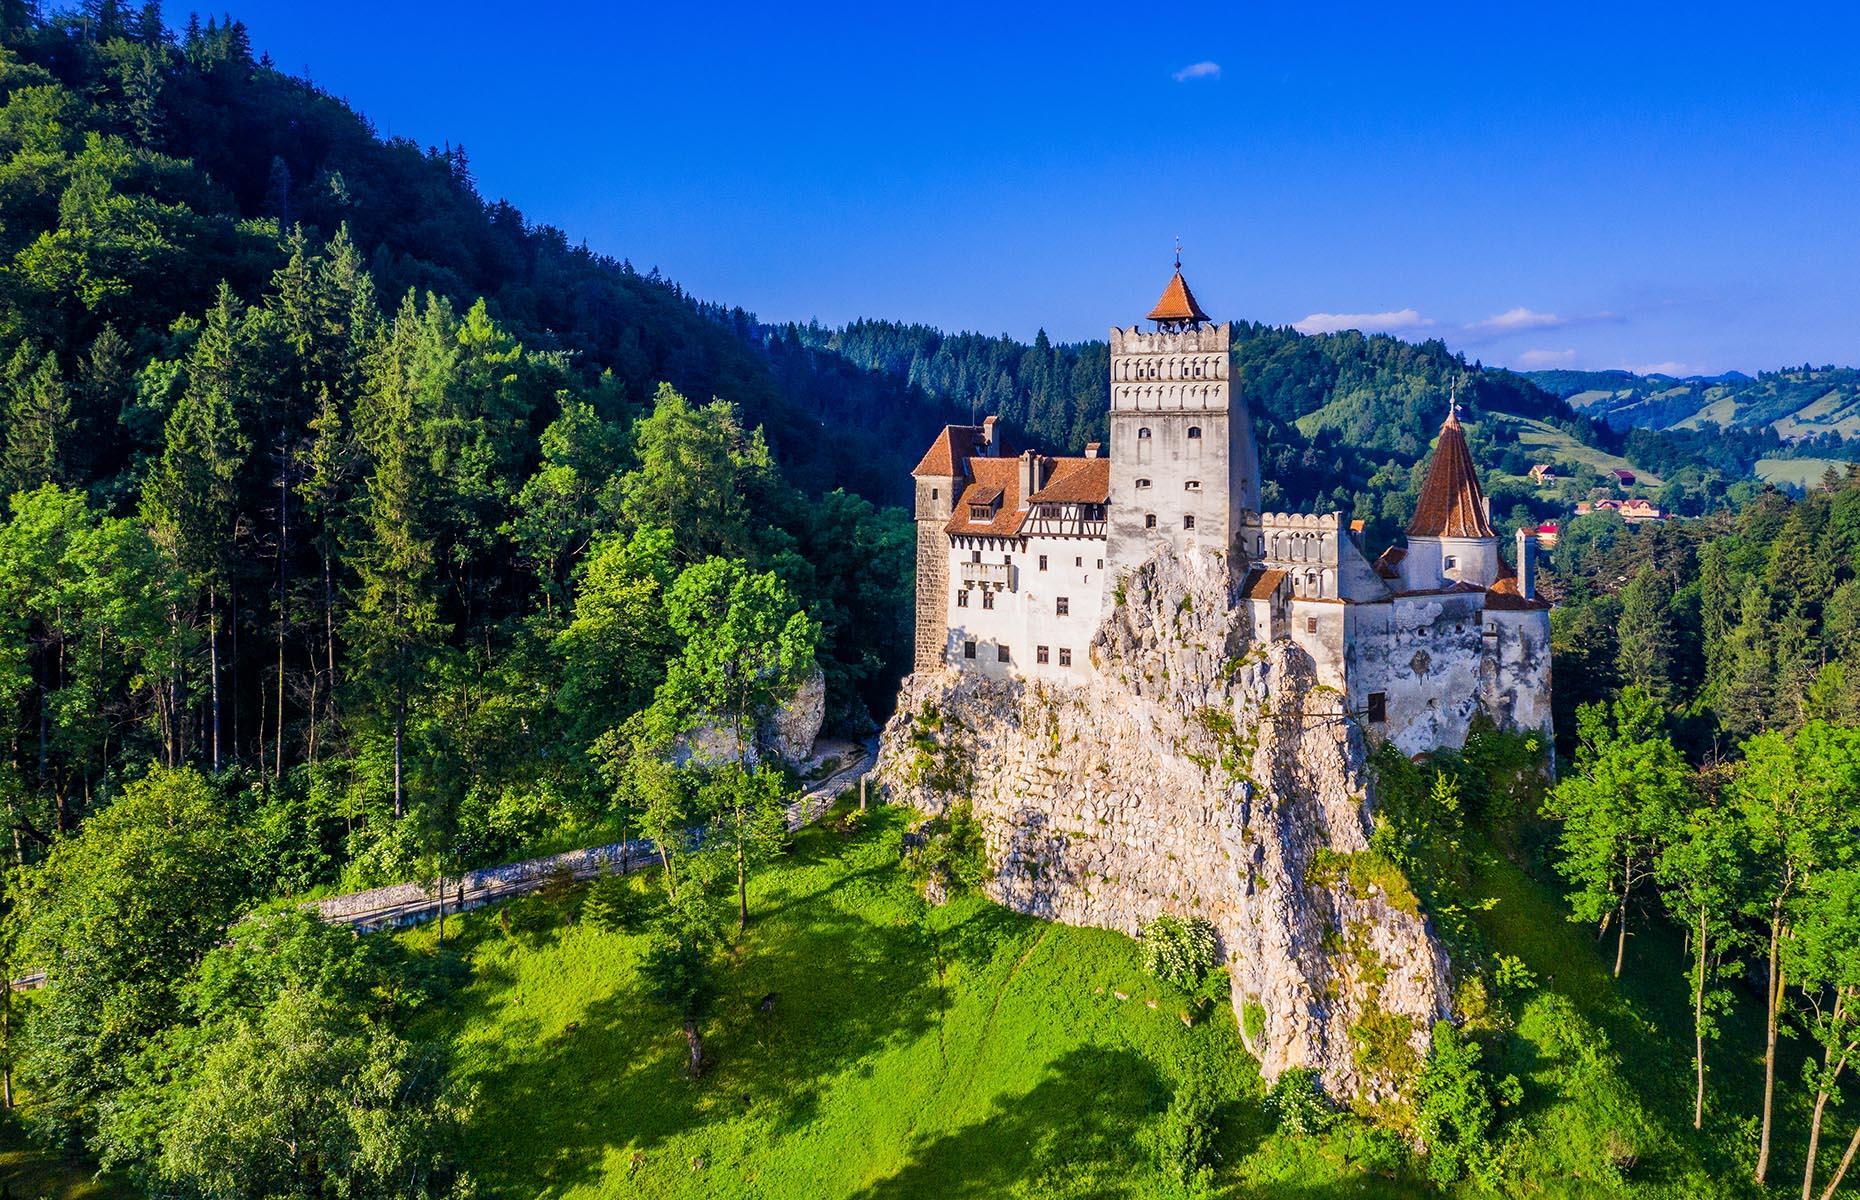 37 fairytale castles in Europe that you NEED to visit